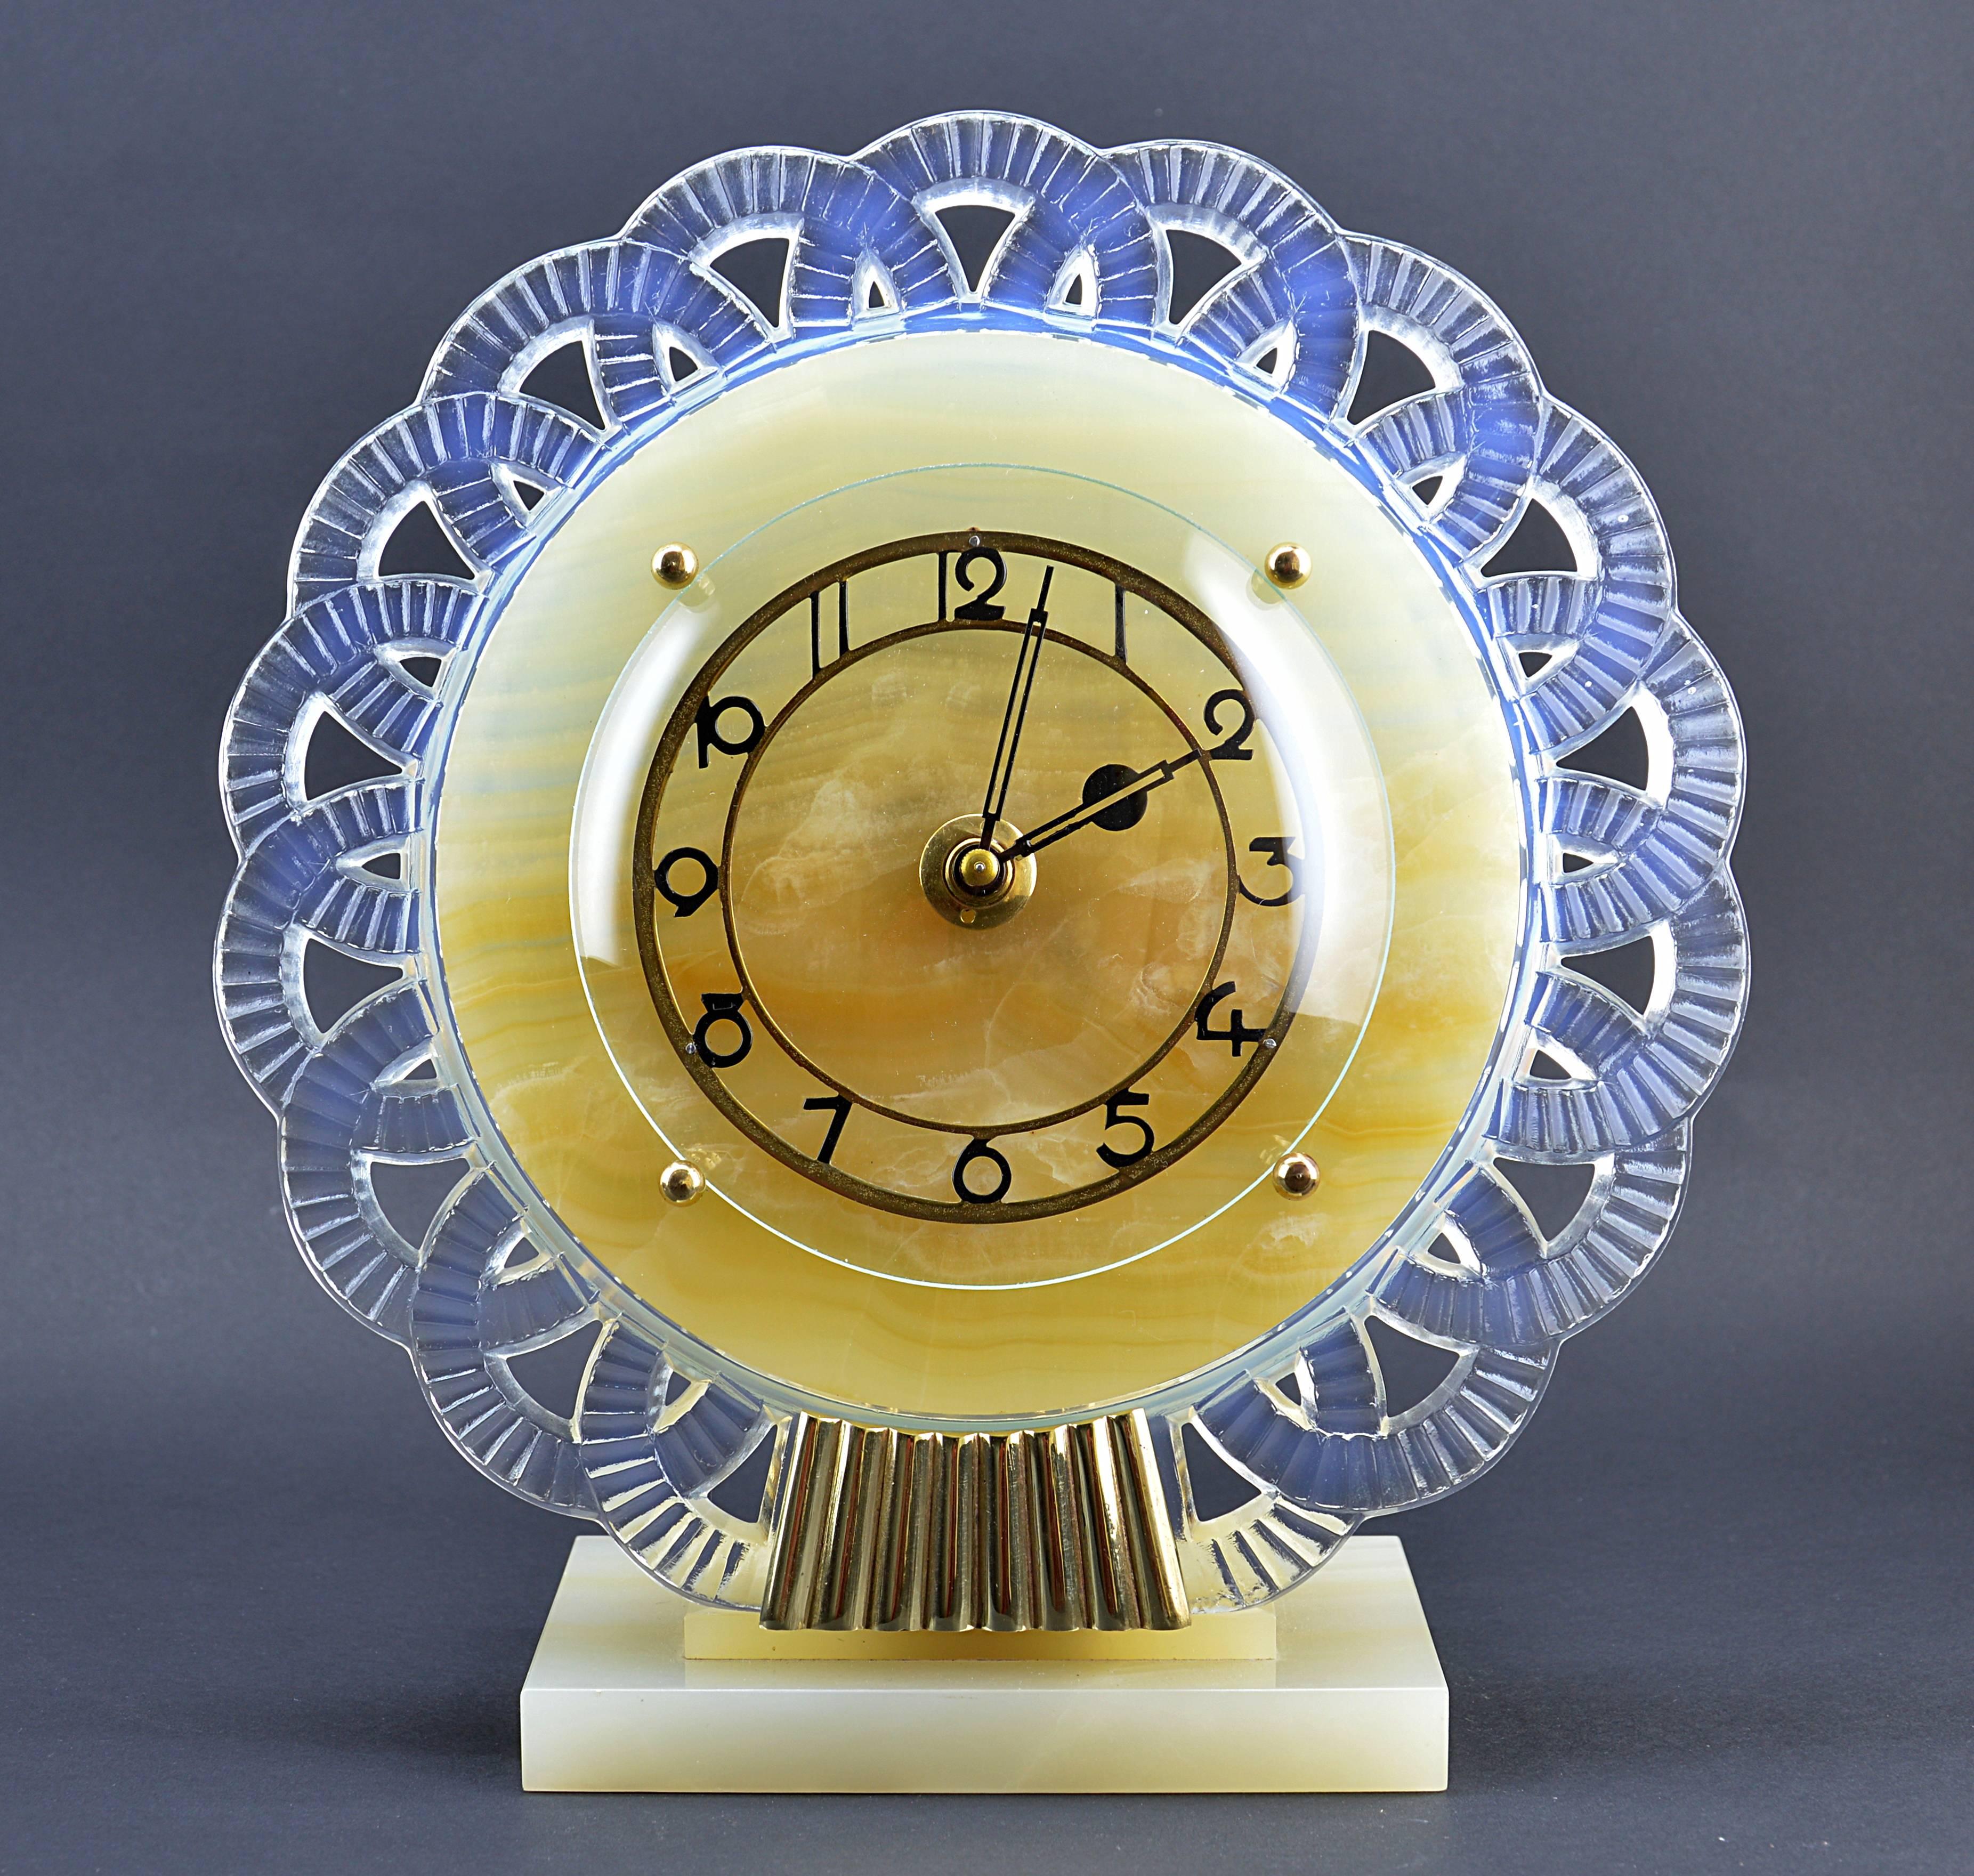 French Art Deco clock by Bayard, France, late 1930s. 8 days movement, 7 rubis jewel. Rounded with a molded opalescent glass piece in the style of Marius Sabino or René Lalique. Actually, this glass piece is very similar to a Pierre D'Avesn's work at